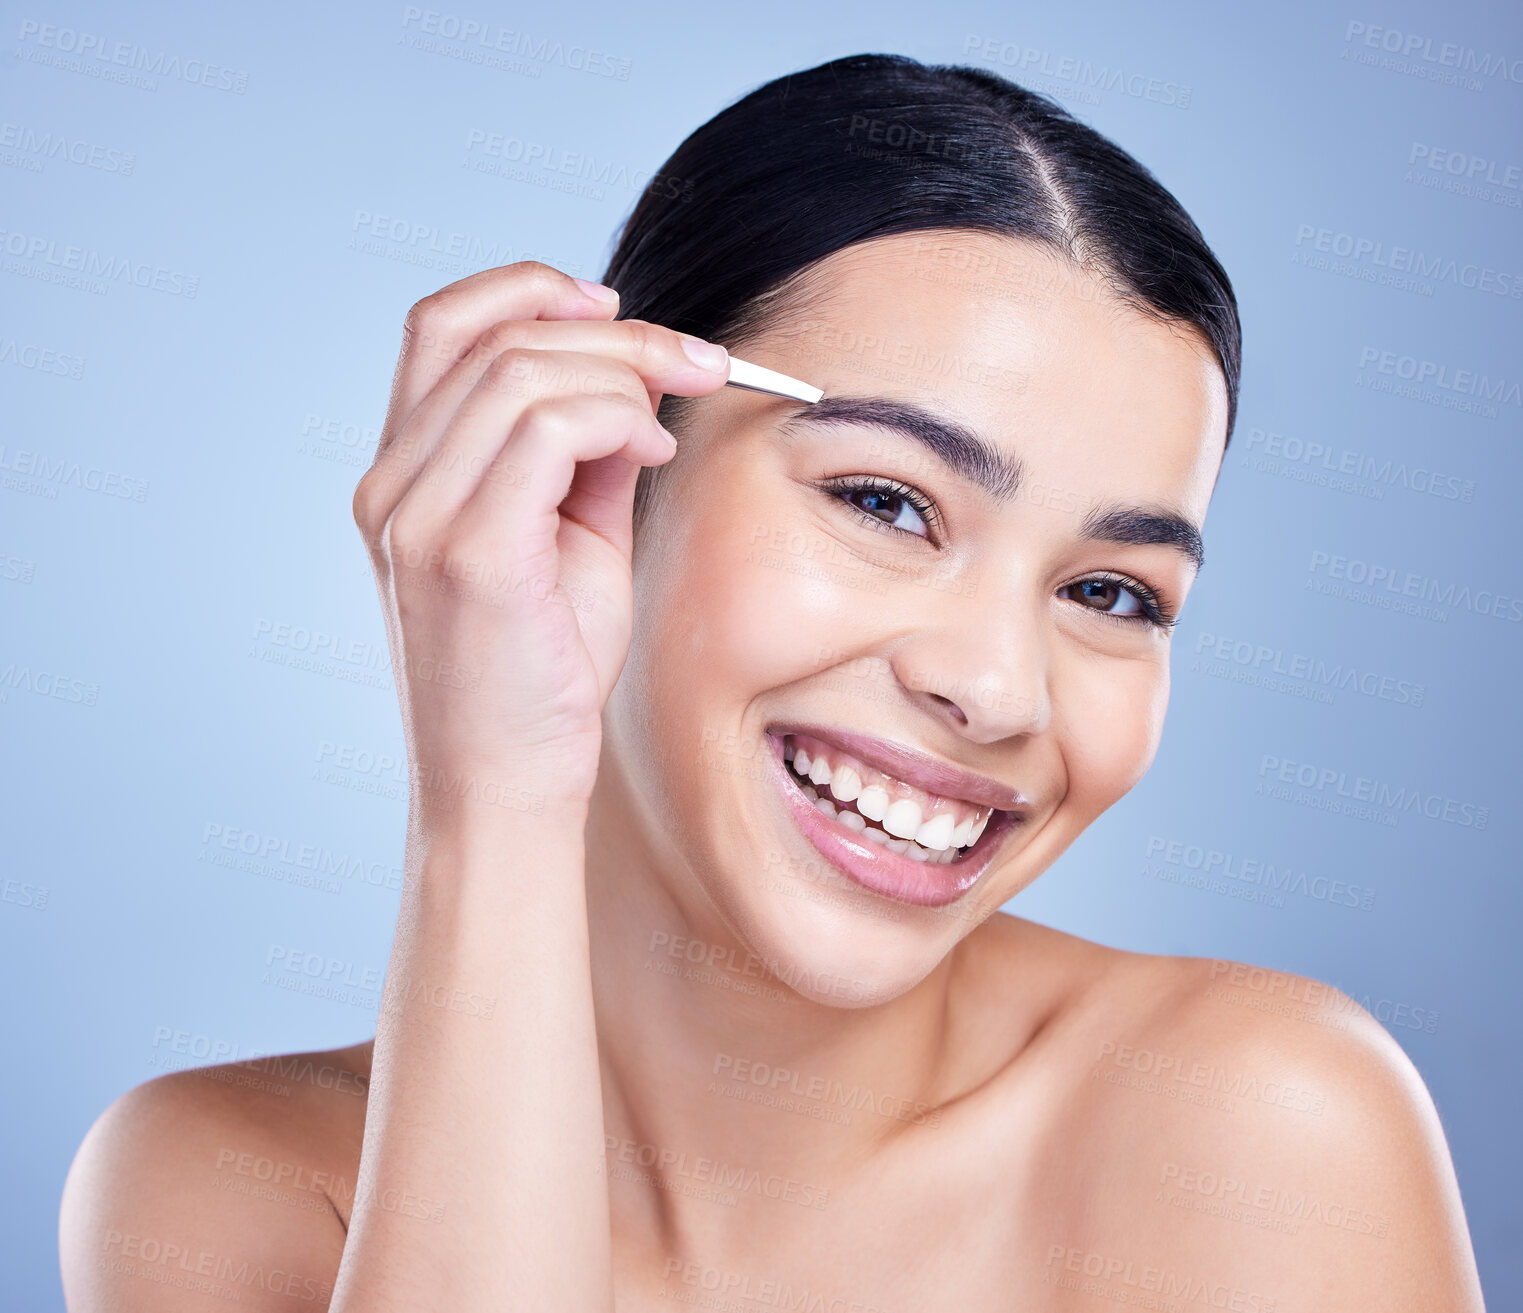 Buy stock photo Studio portrait of a smiling mixed race young woman with glowing skin posing against blue copyspace background while tweezing her eyebrows. Hispanic model using a tweezer for hair removal